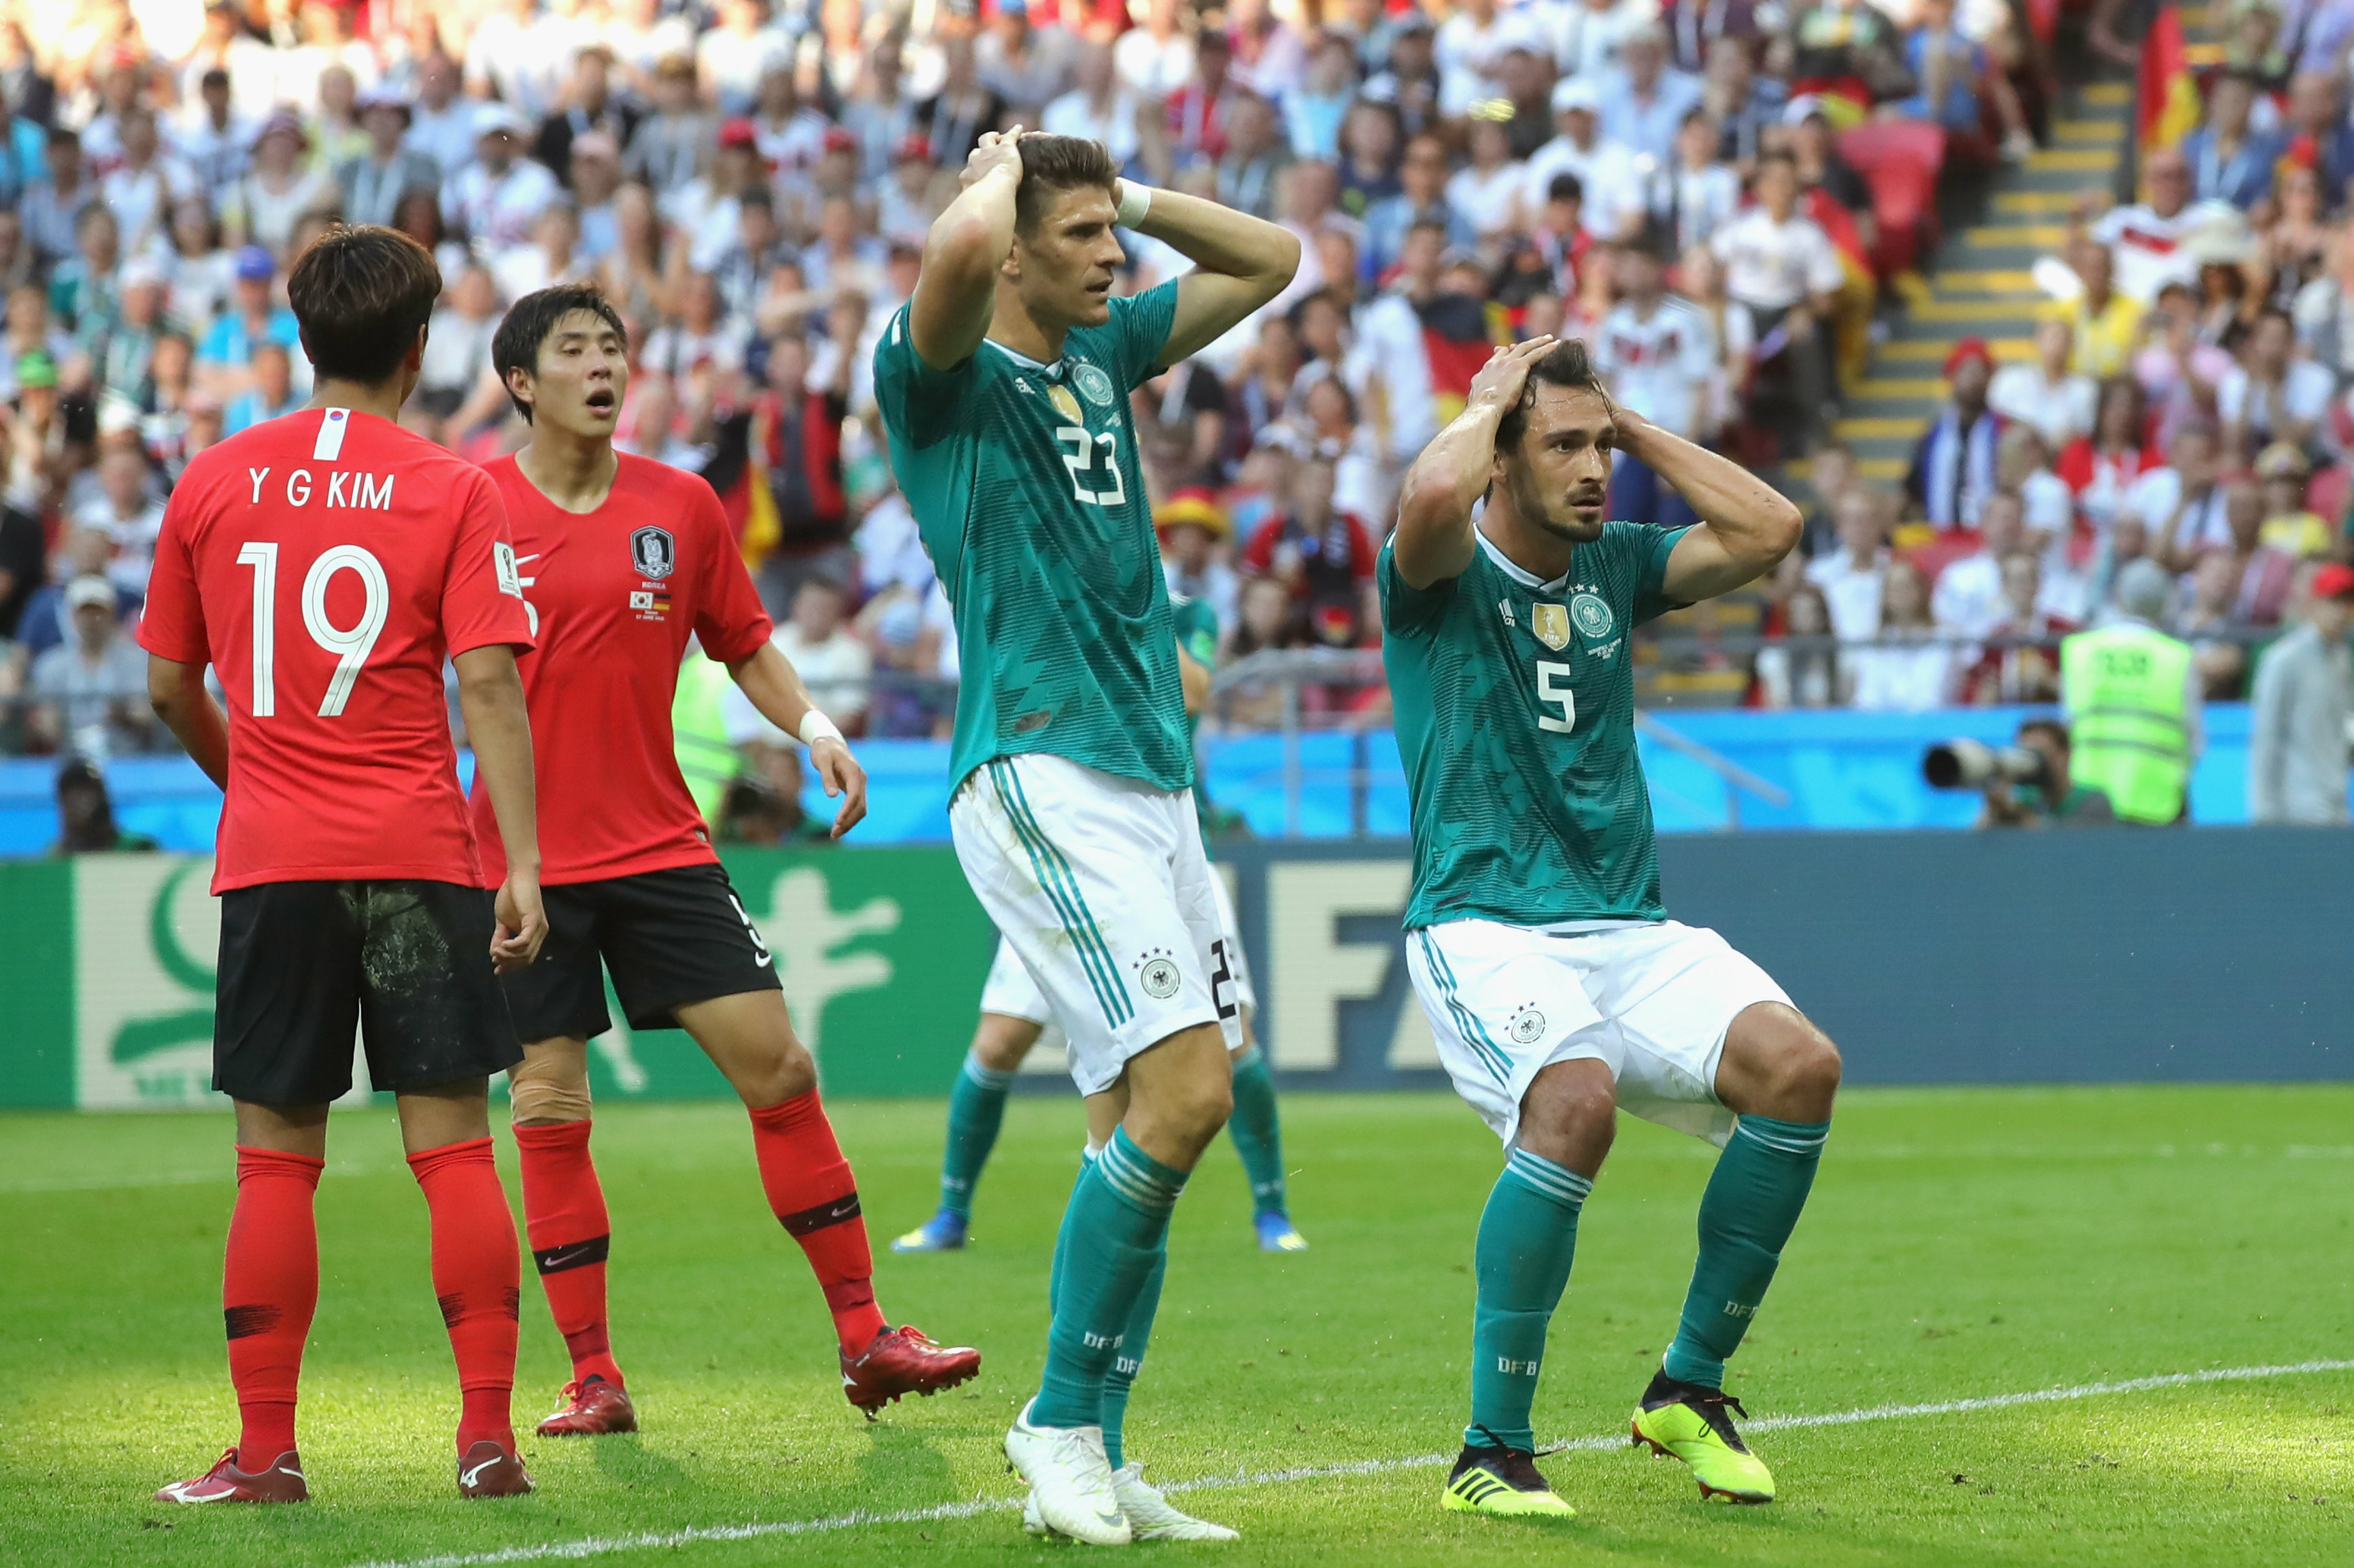 German players react after a missed chance.